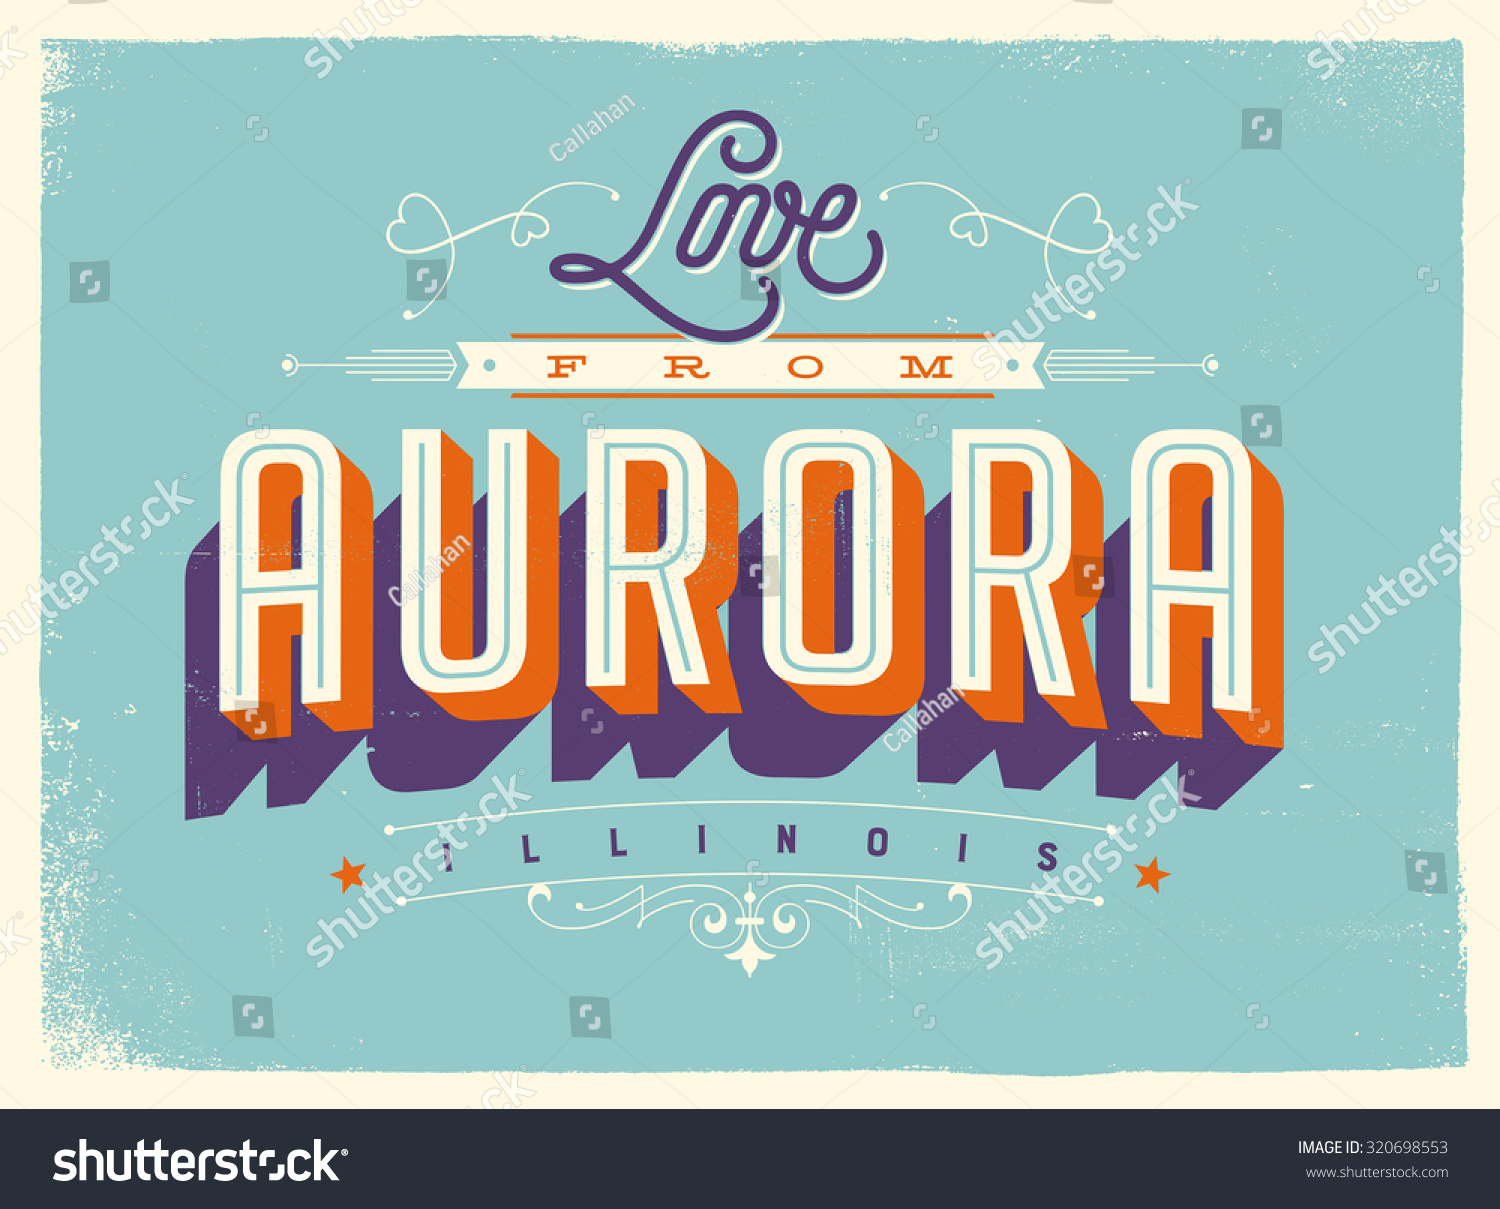 SVG of Vintage style Touristic Greeting Card with texture effects - Love from Aurora, Illinois - Vector EPS10. svg